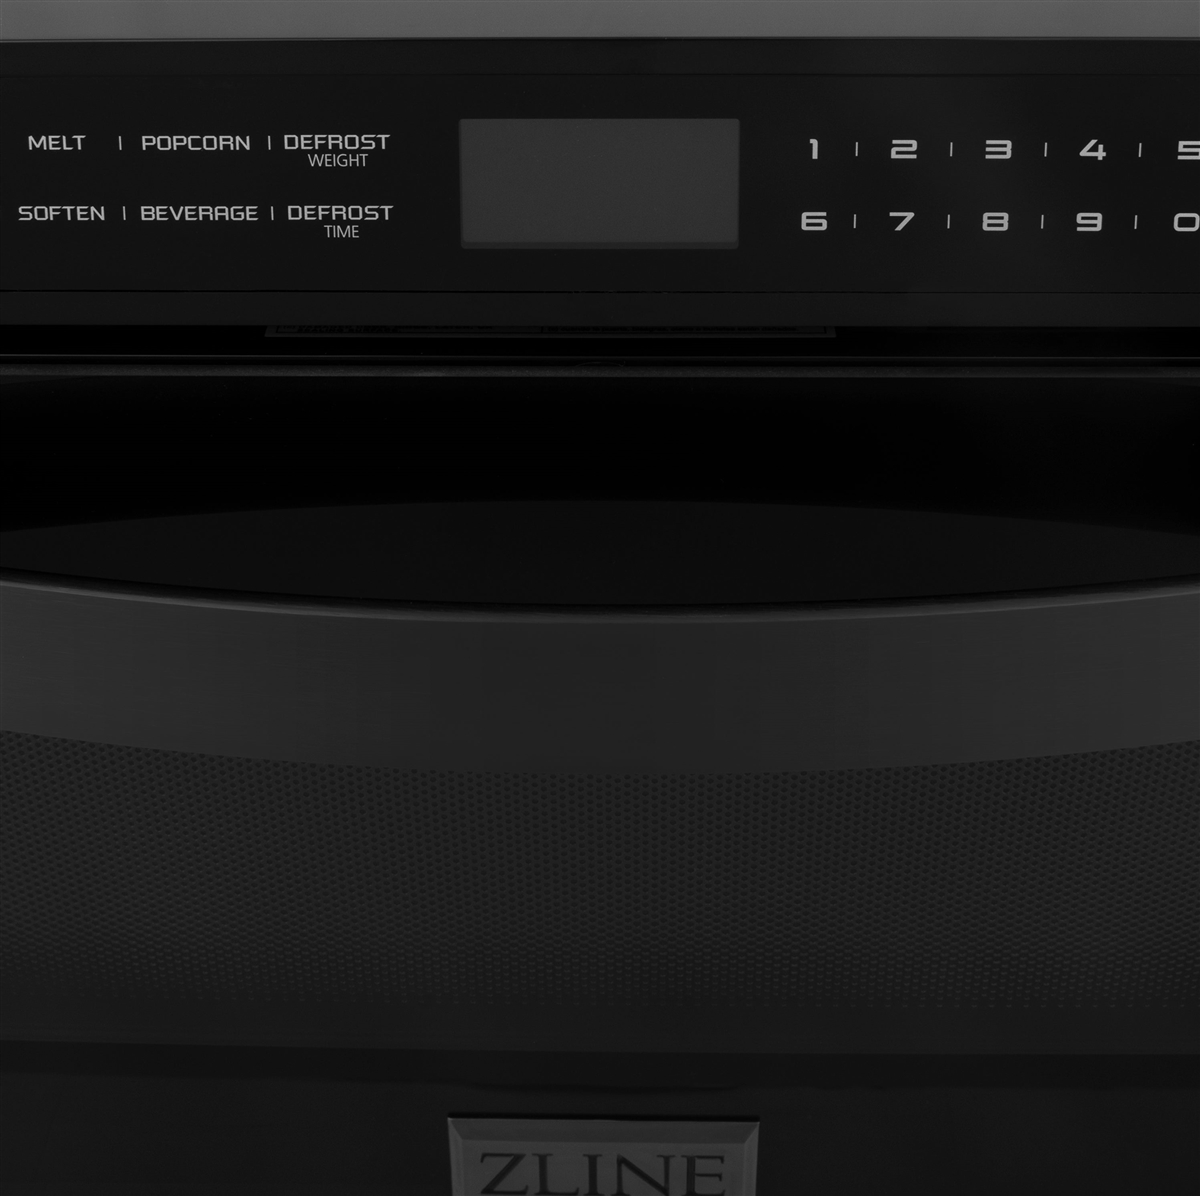 ZLINE 30 Inch 1.2 cu. ft. Built-In Microwave Drawer In Stainless